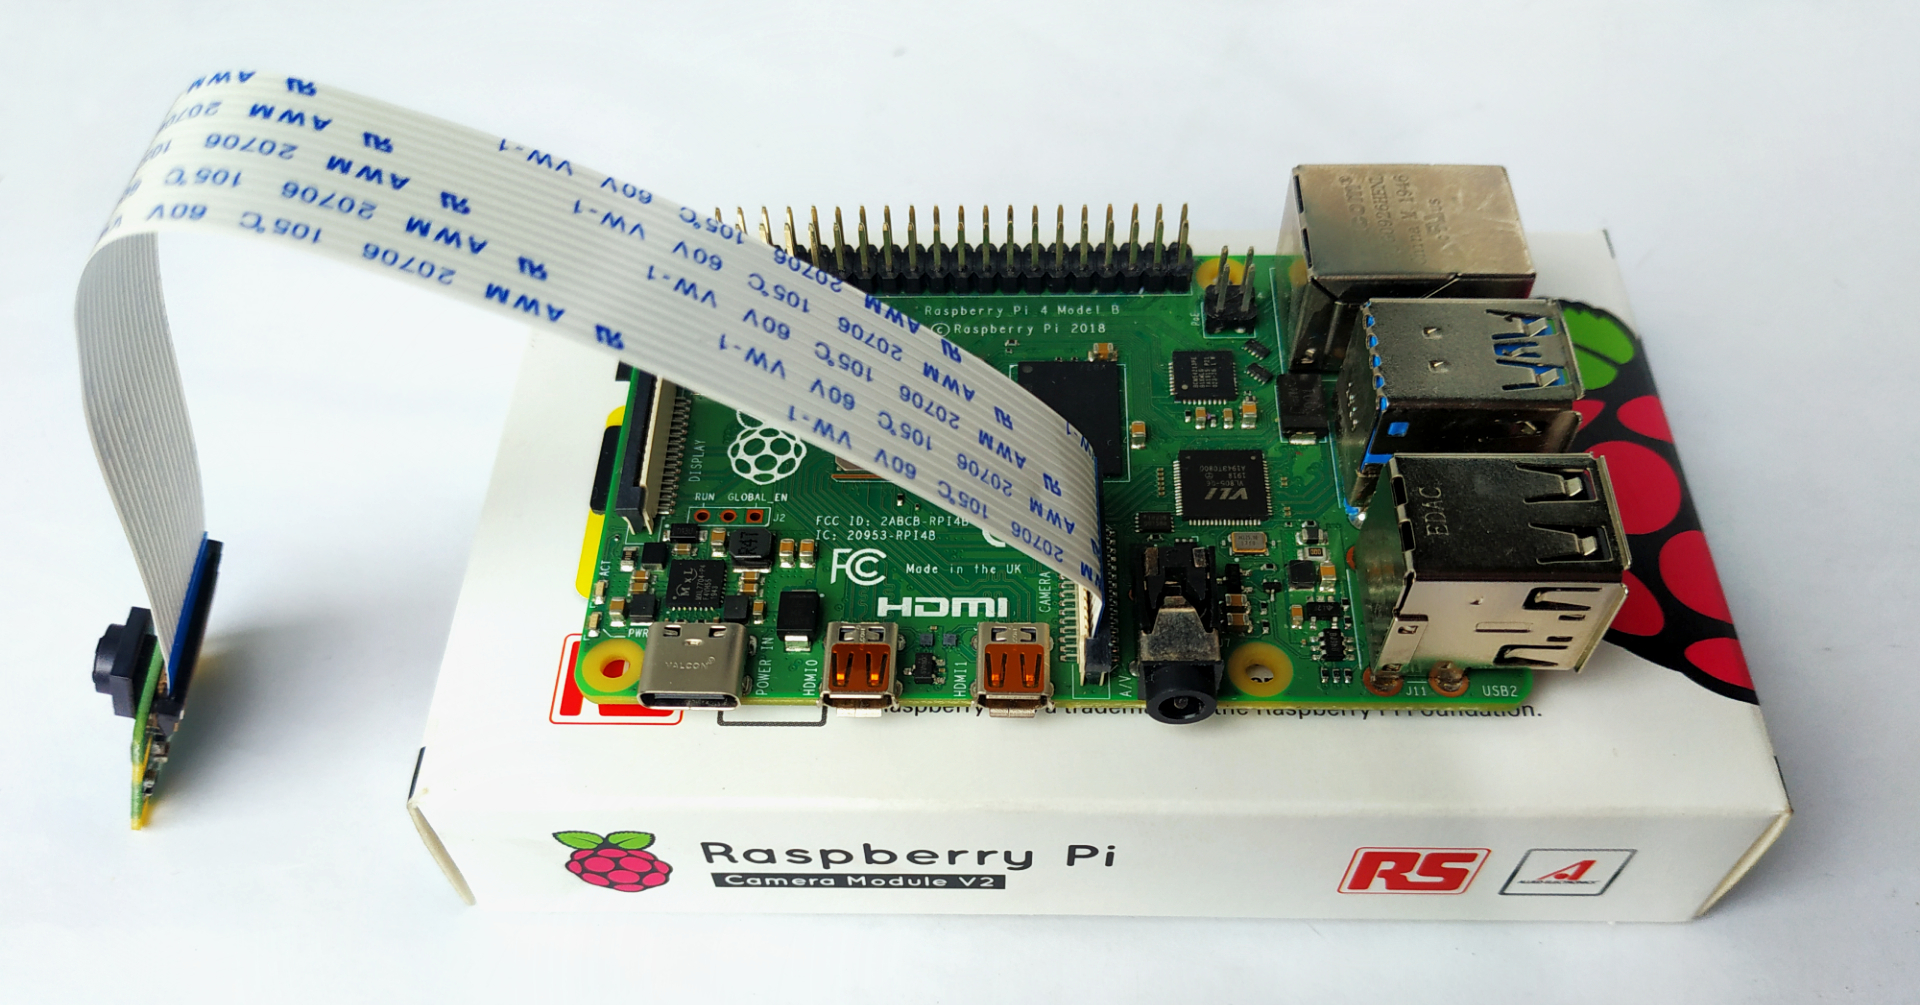 How to Take Pictures and Videos With a Raspberry Pi